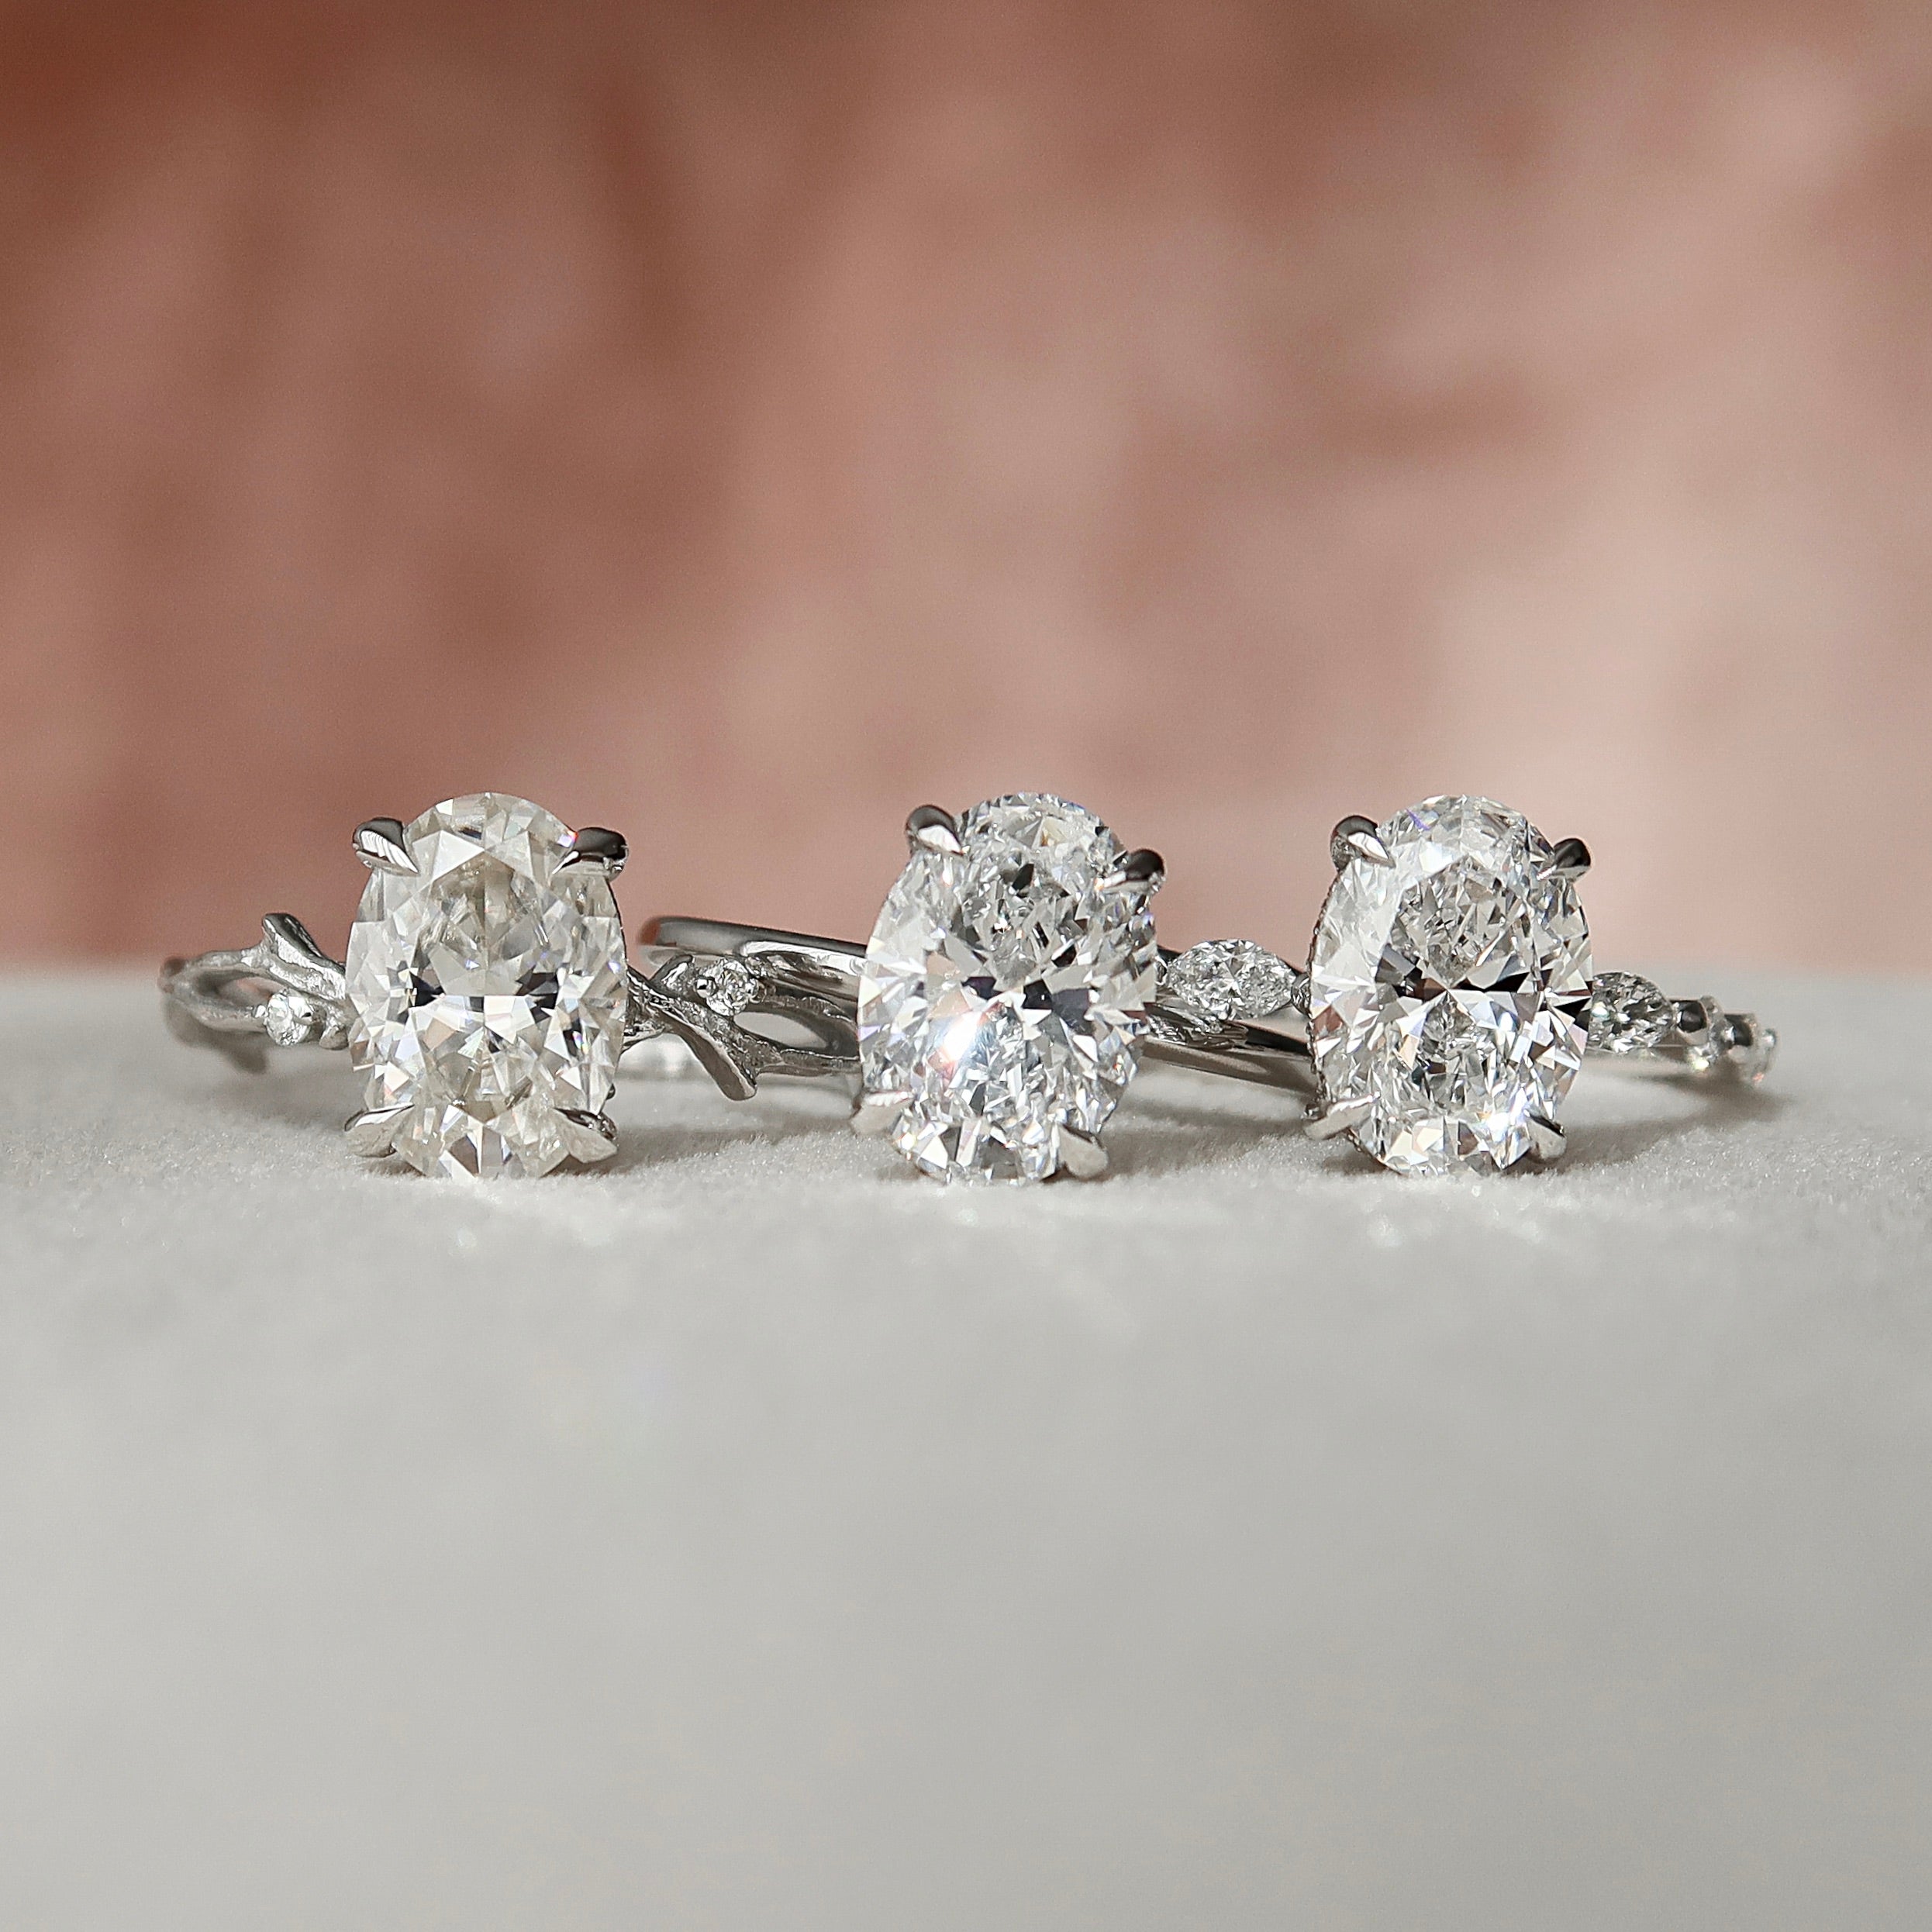 Everything You Need to Know About White Gold Engagement Rings